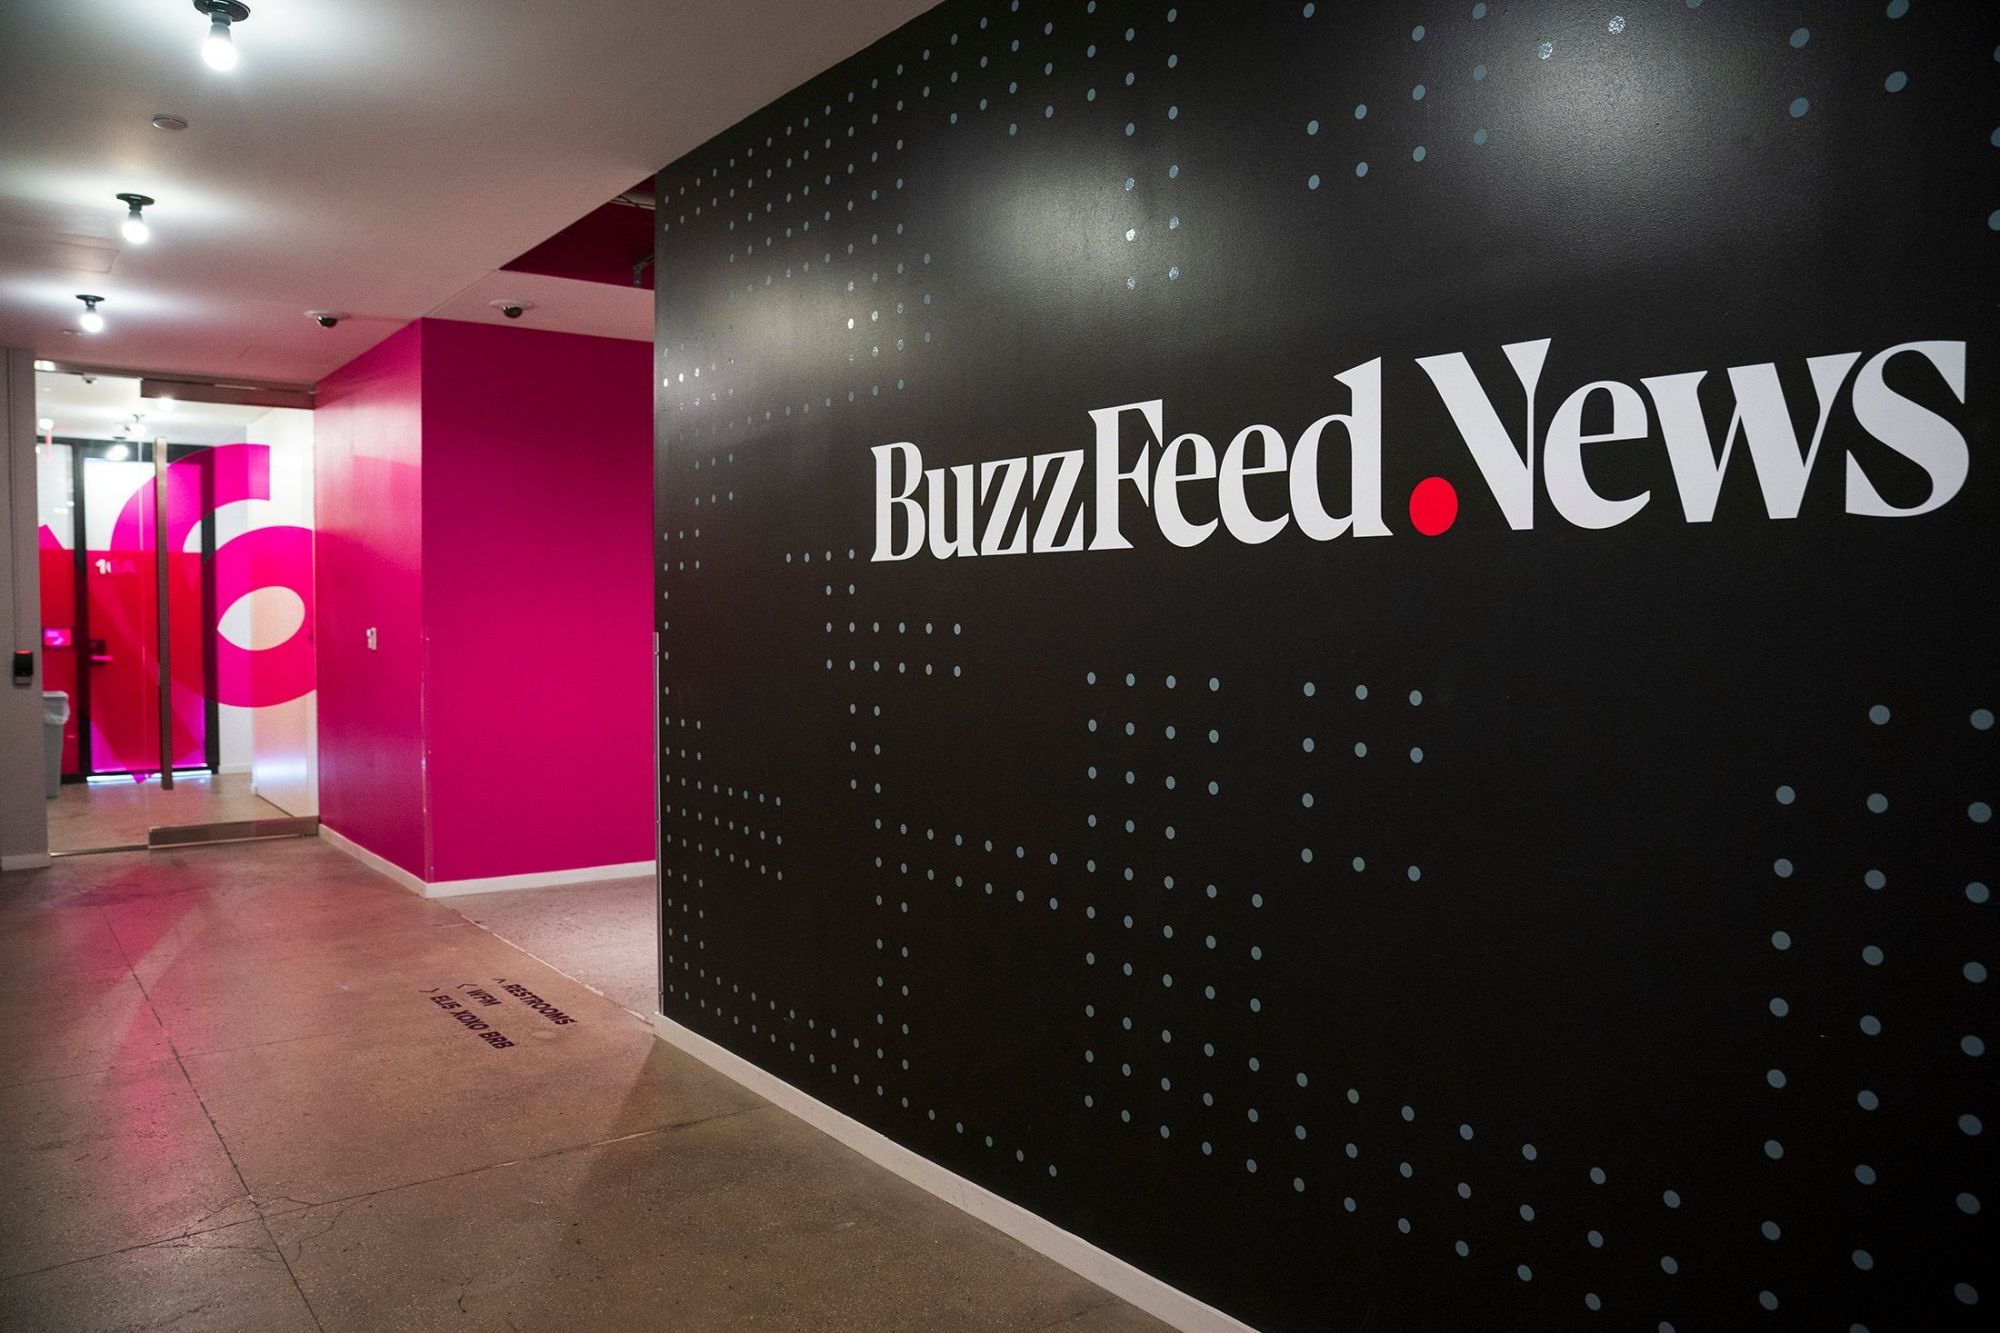 Buzzfeed acquires Huffington Post in deal with Verizon Wireless